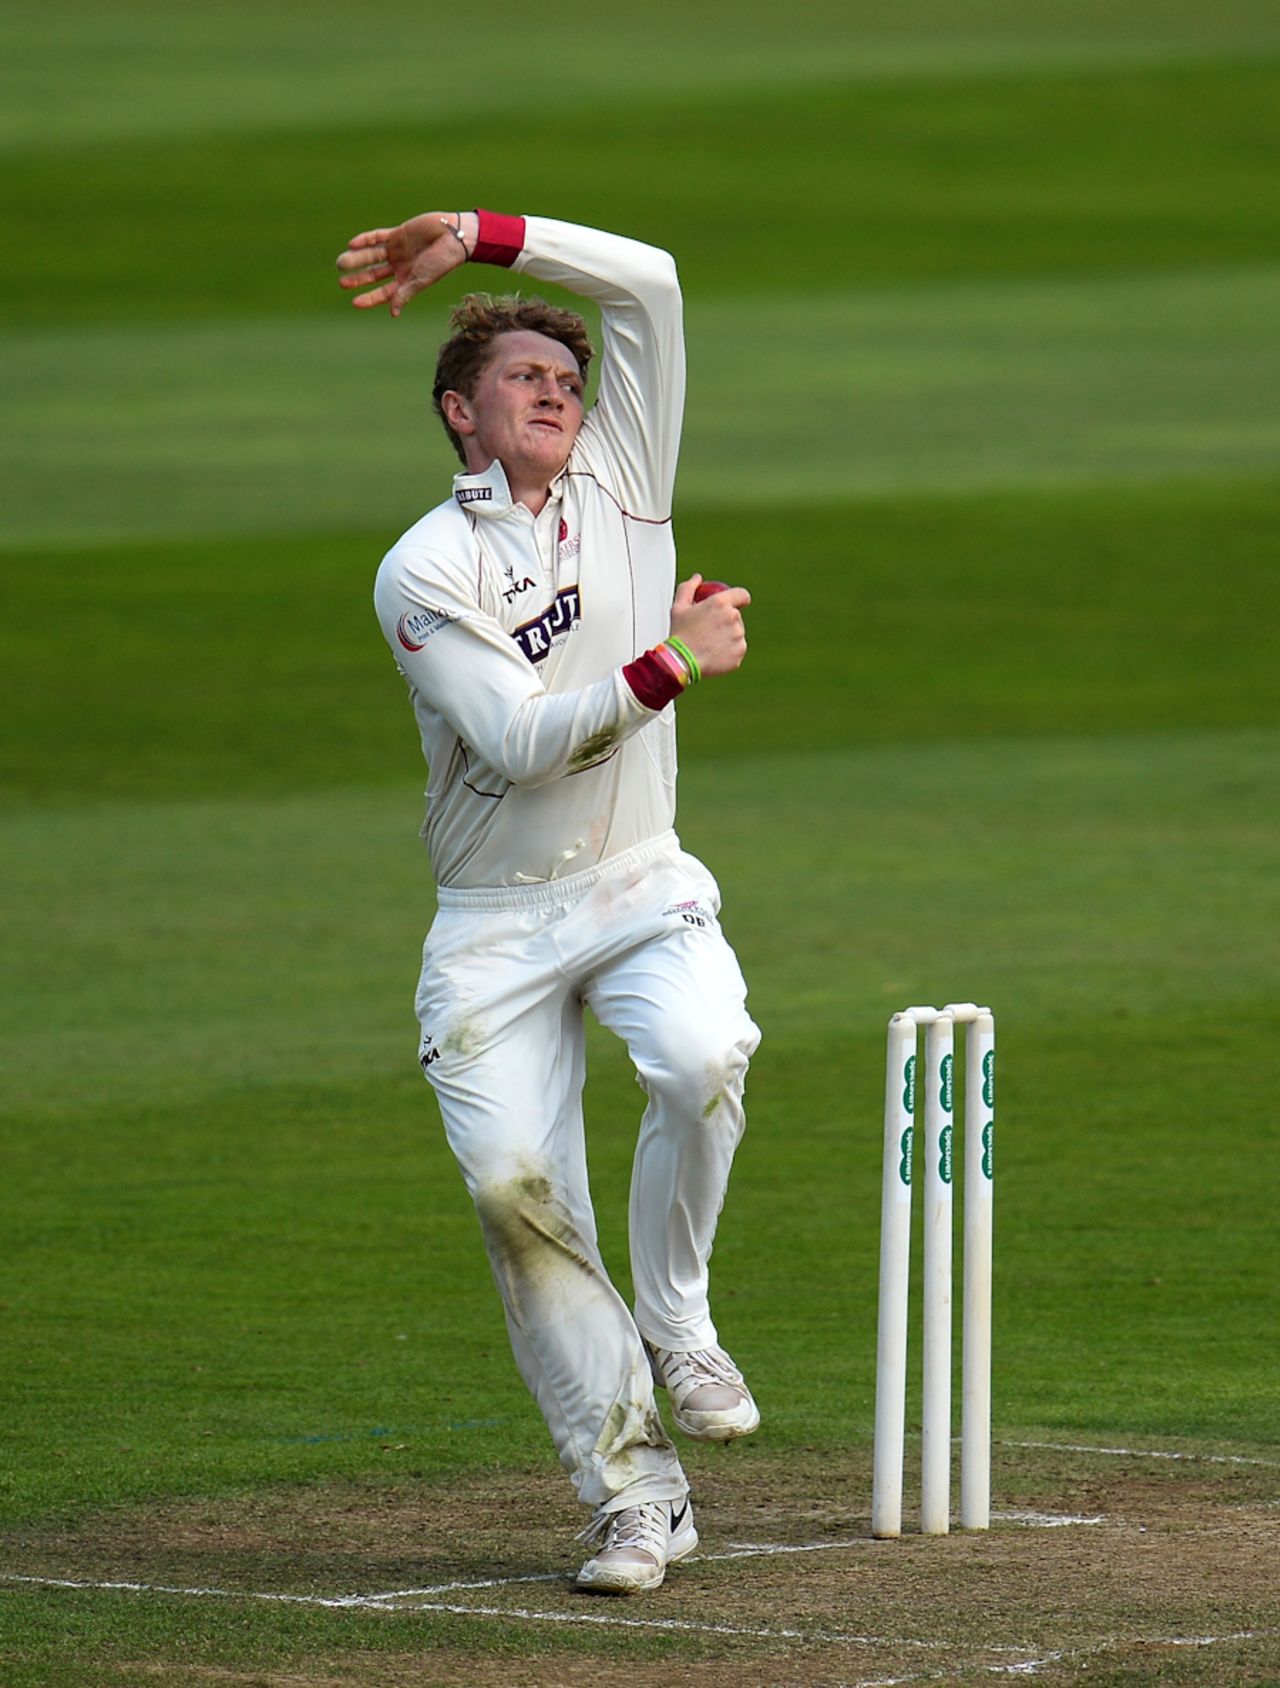 Dom Bess in action for Somerset, Somerset v Lancashire, Specsavers Championship Division One, Taunton, September 13, 2017